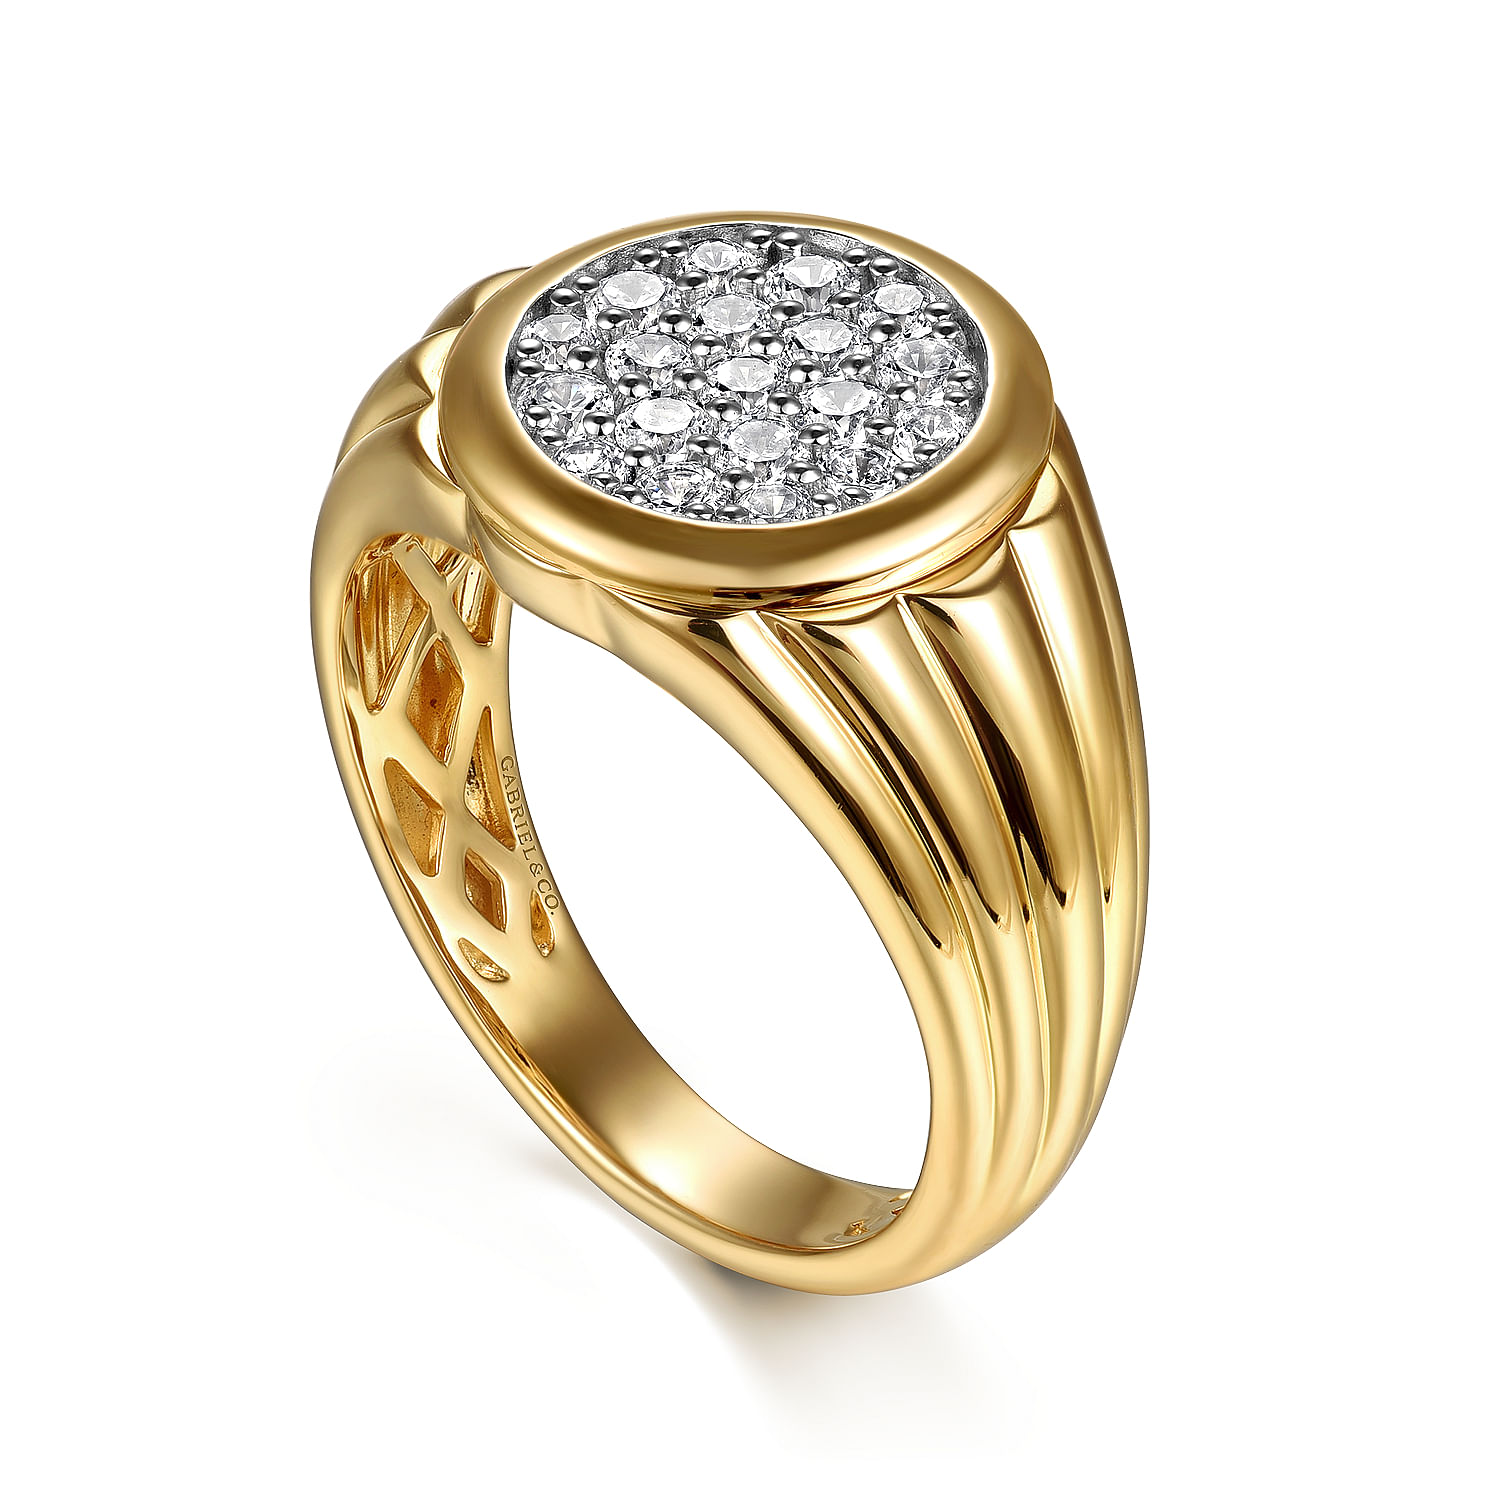 Wide 14K Yellow Gold Cluster Diamond Mens Ring in High Polished Finish